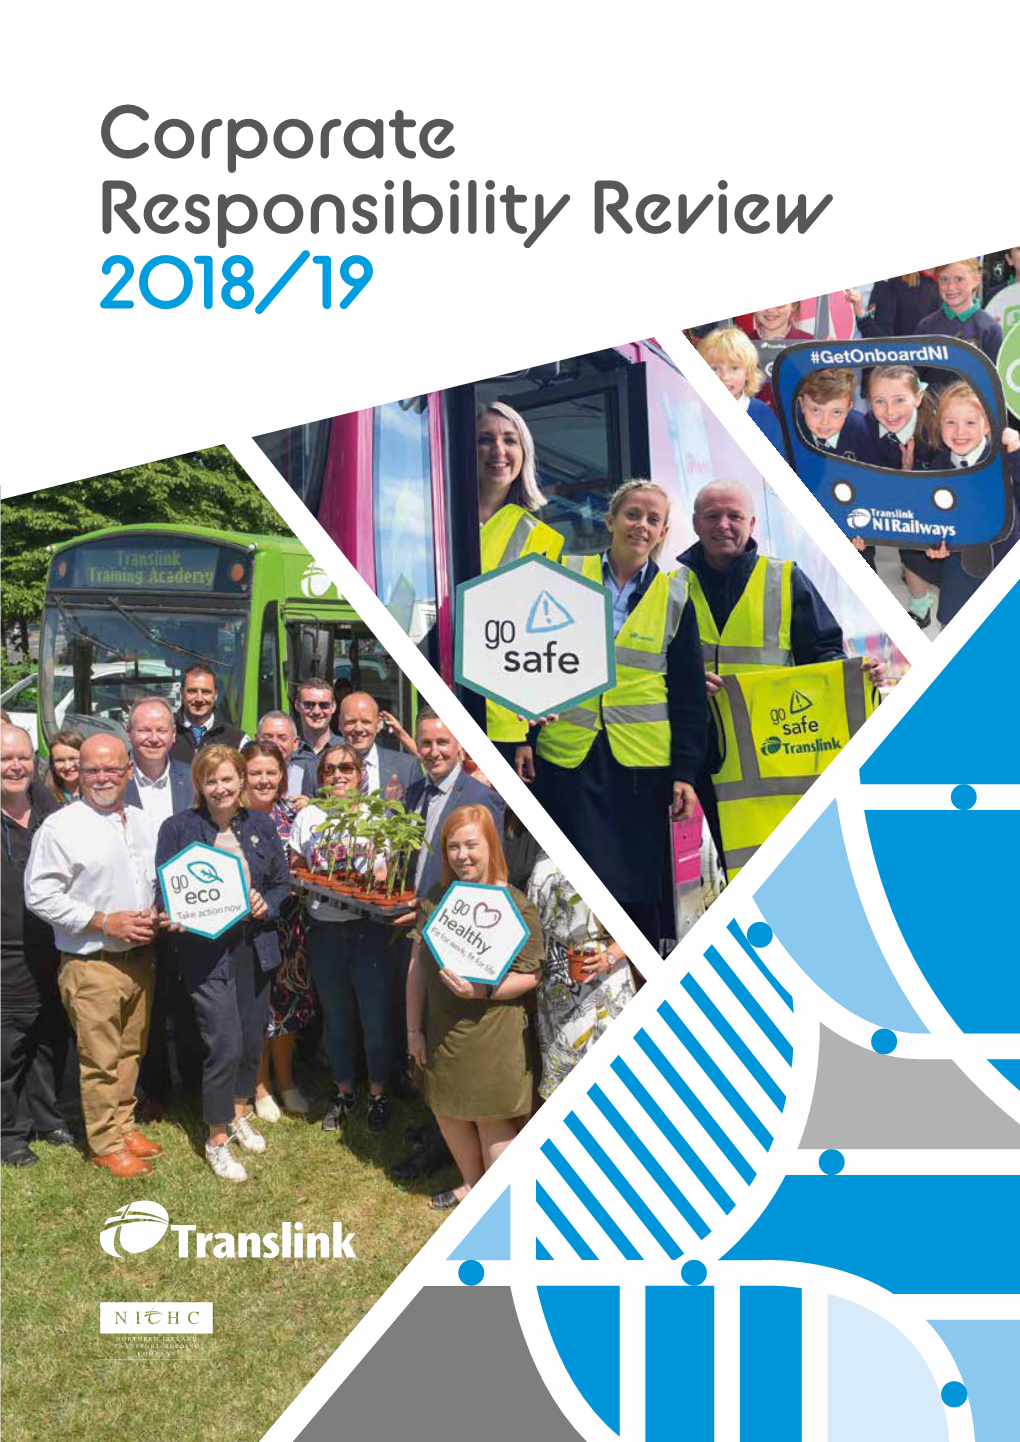 Corporate Responsibility Review 2018/19